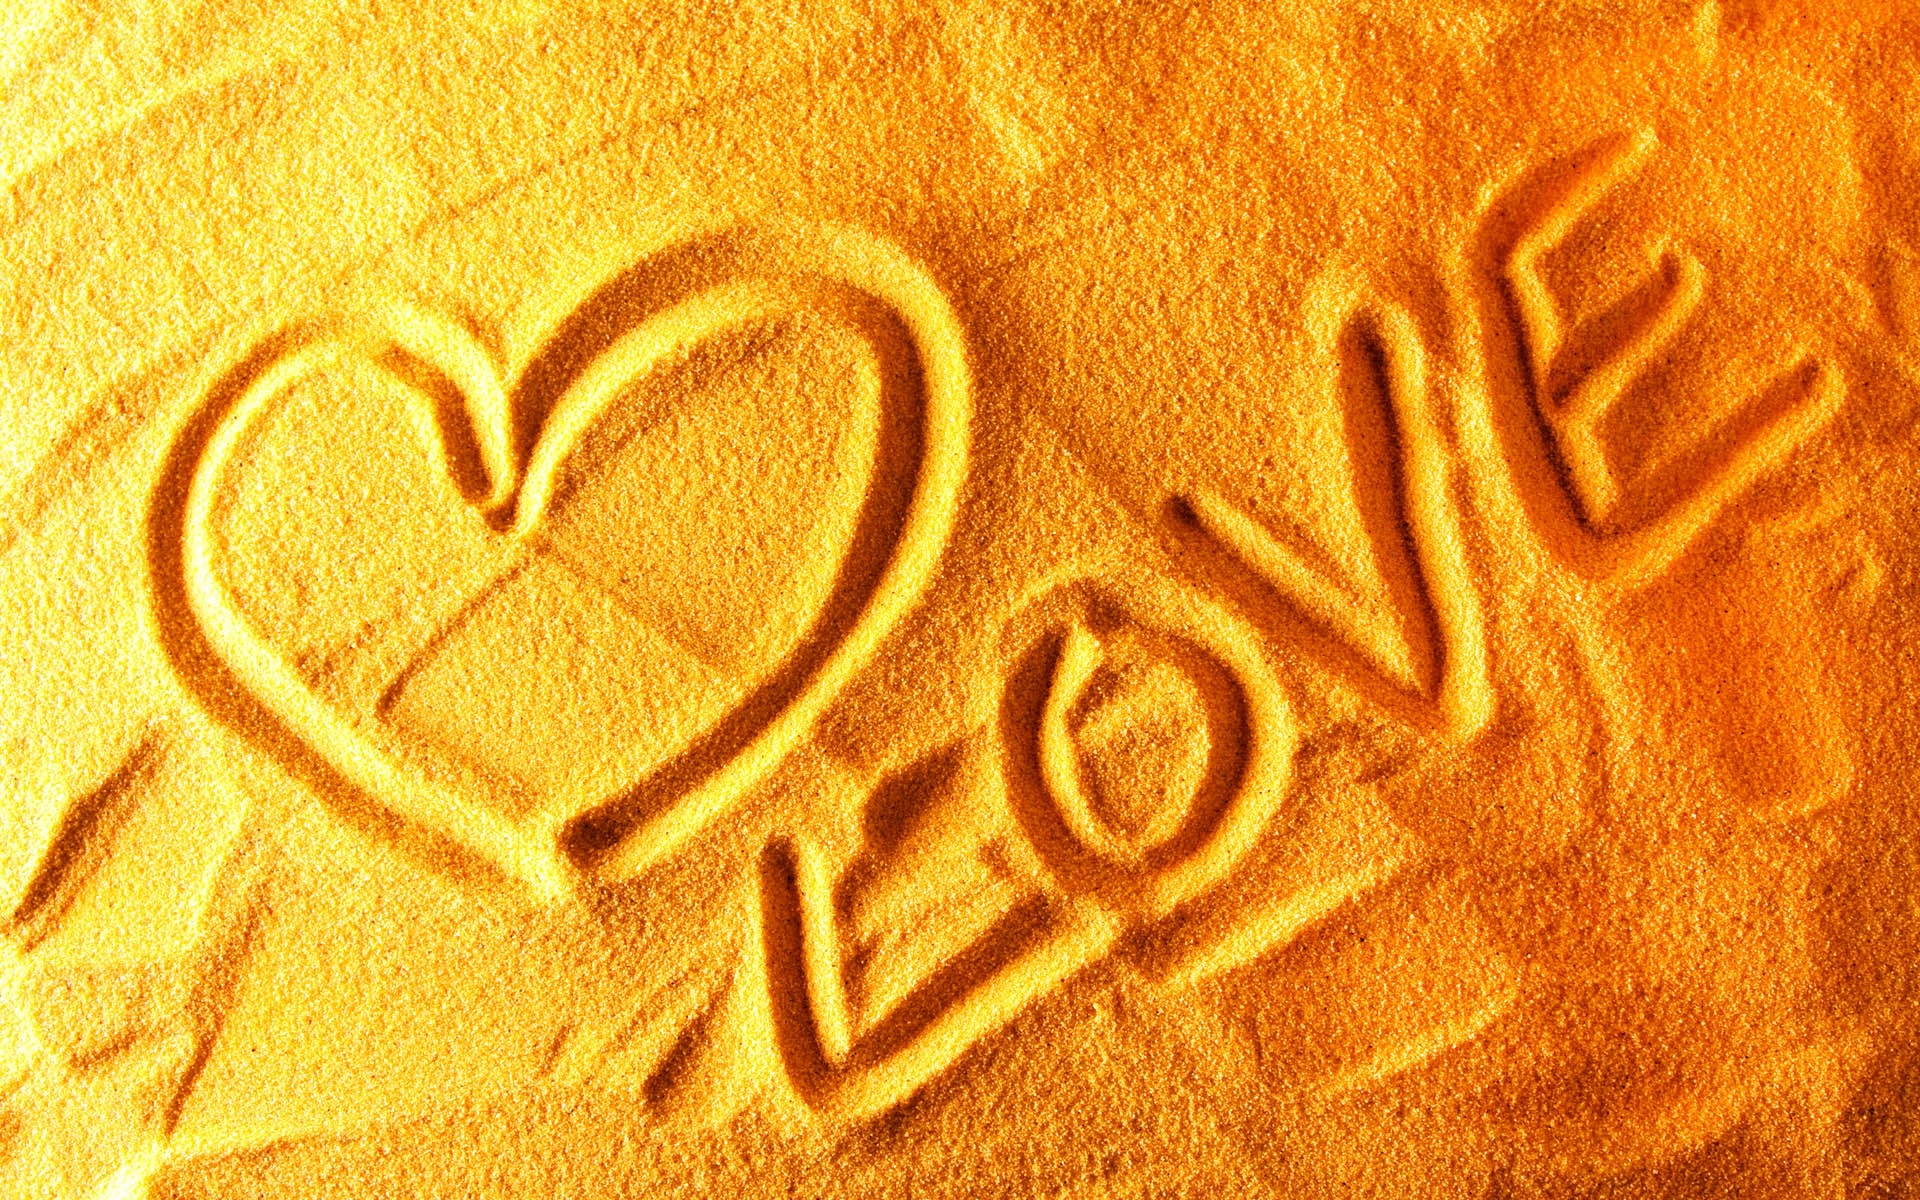 Yellow Hearts Wallpapers - Wallpaper Cave